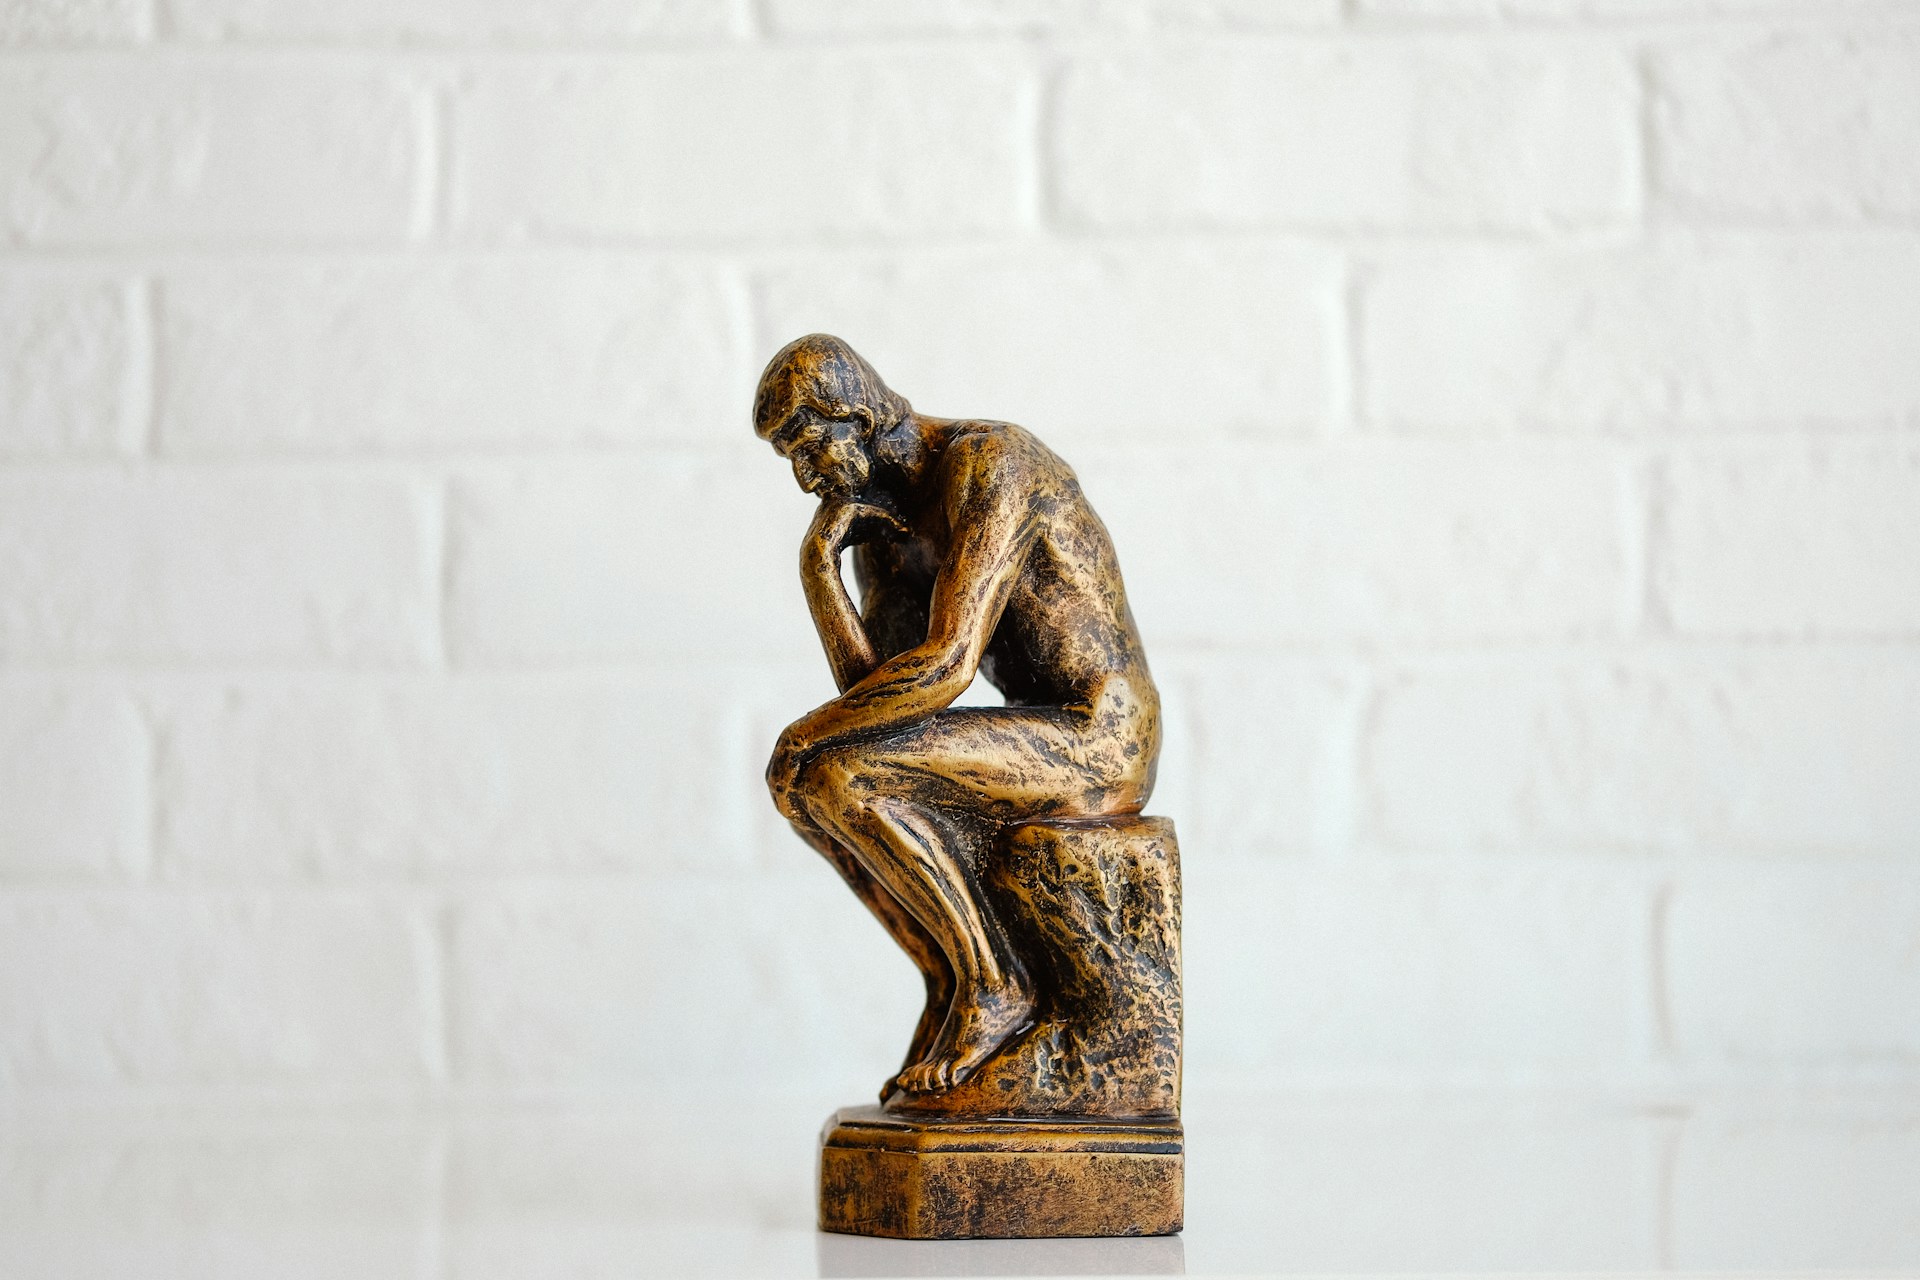 image-of-a-small-statue-of-the-thinker-introverted-and-reflecting